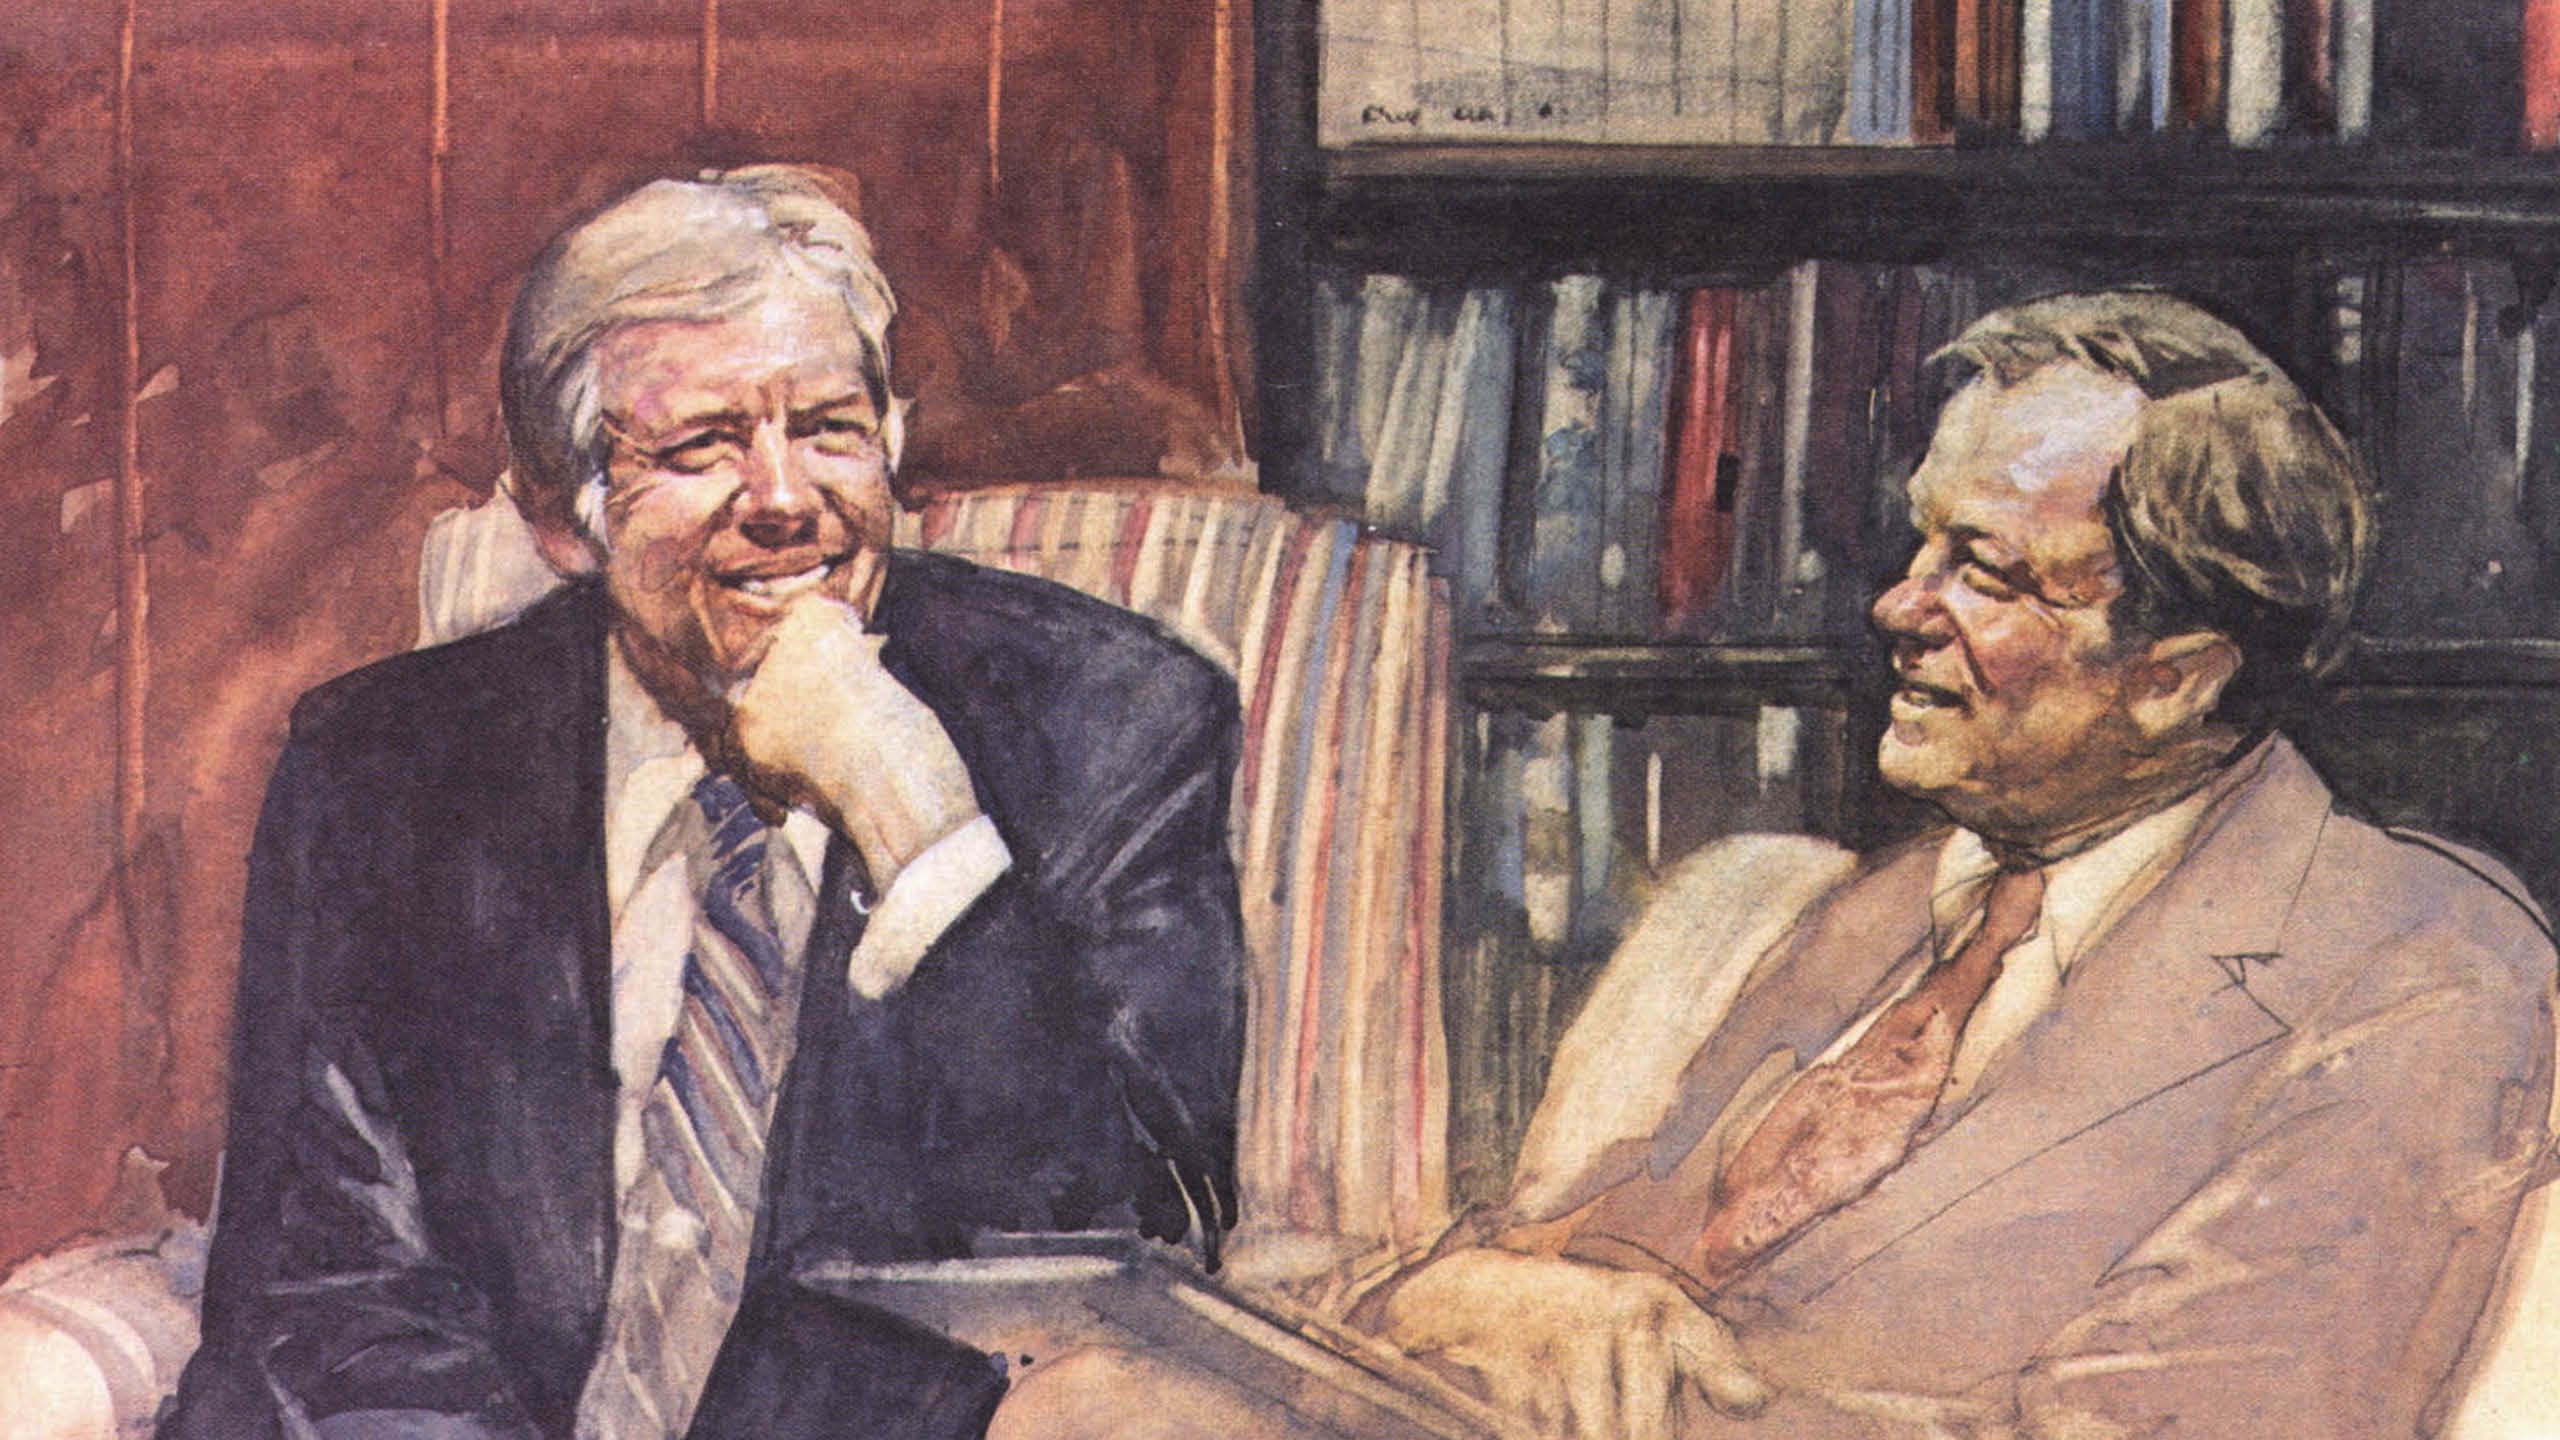 A drawing of President Carter and former Emory President James Laney with the two men seated in front of a bookshelf